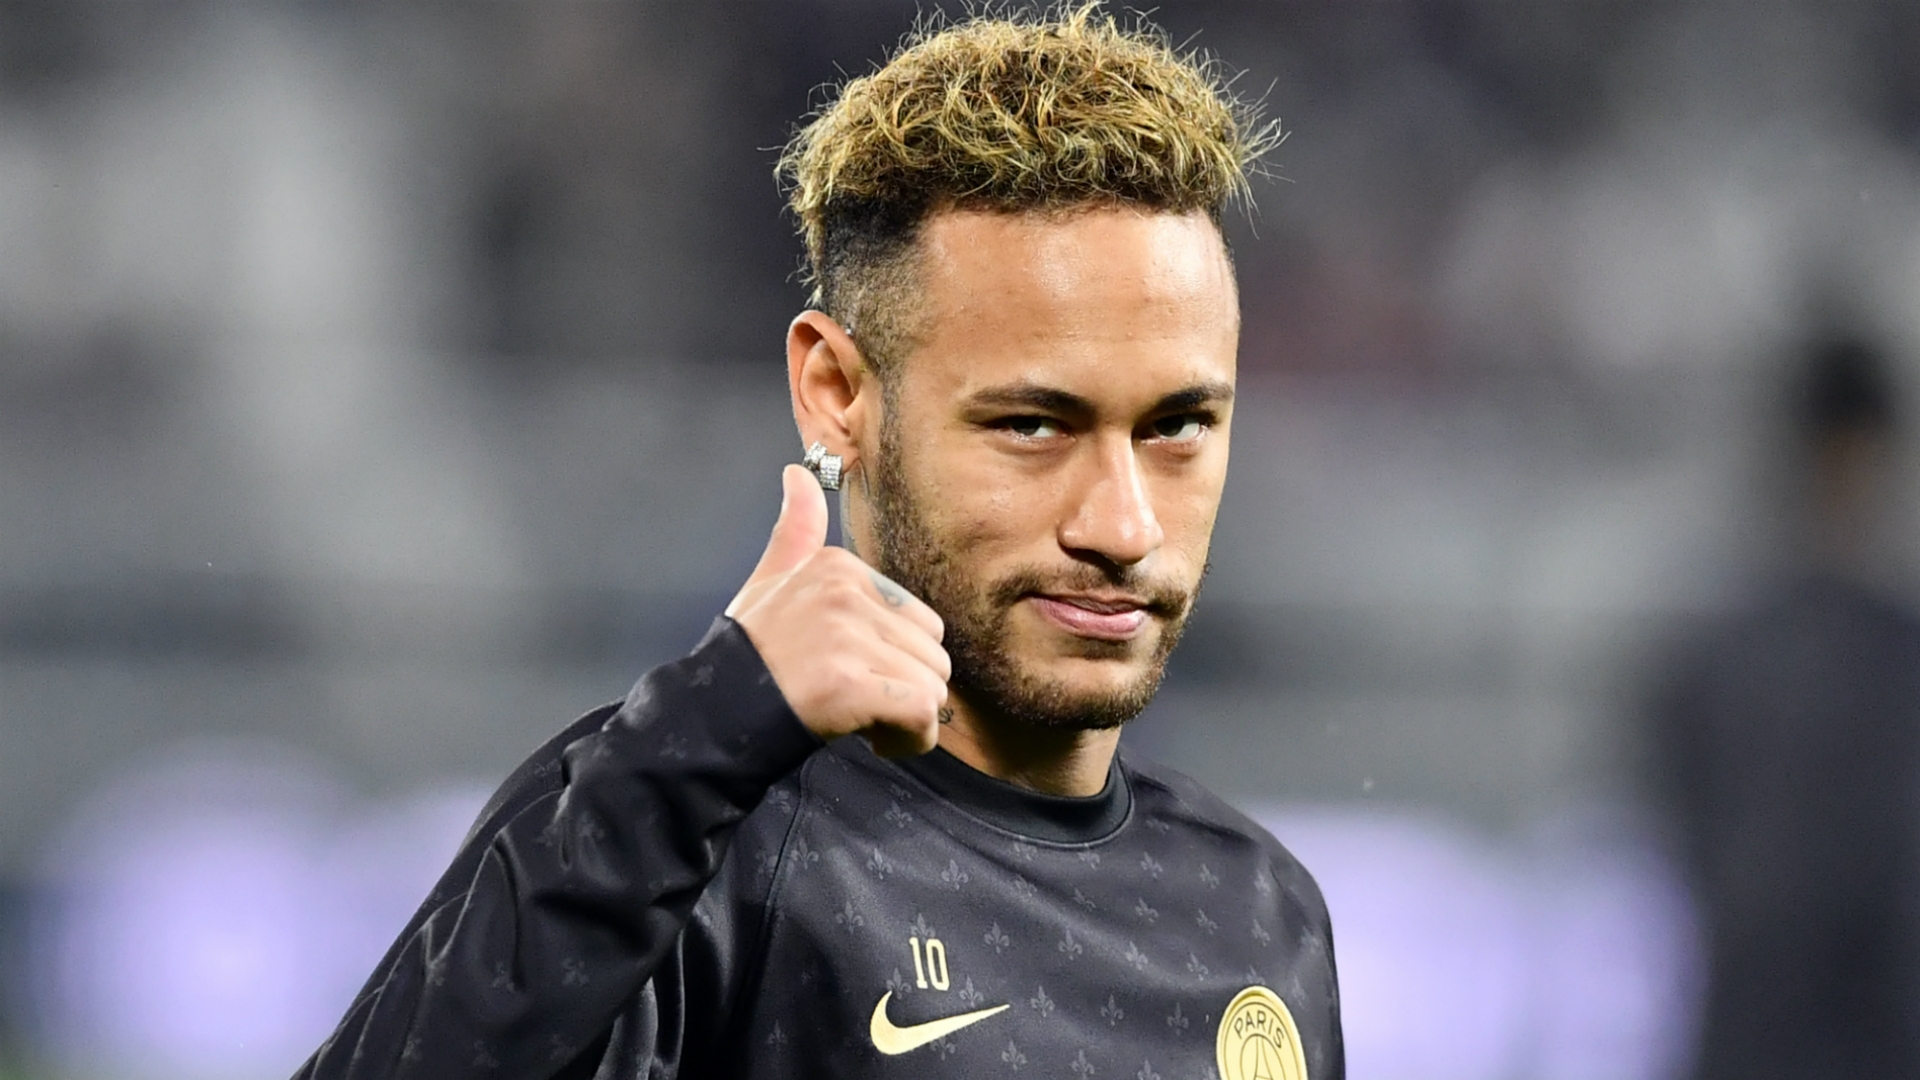 Neymar Jr Transfer Rumors: Deals with FC Barcelona, Real Madrid and